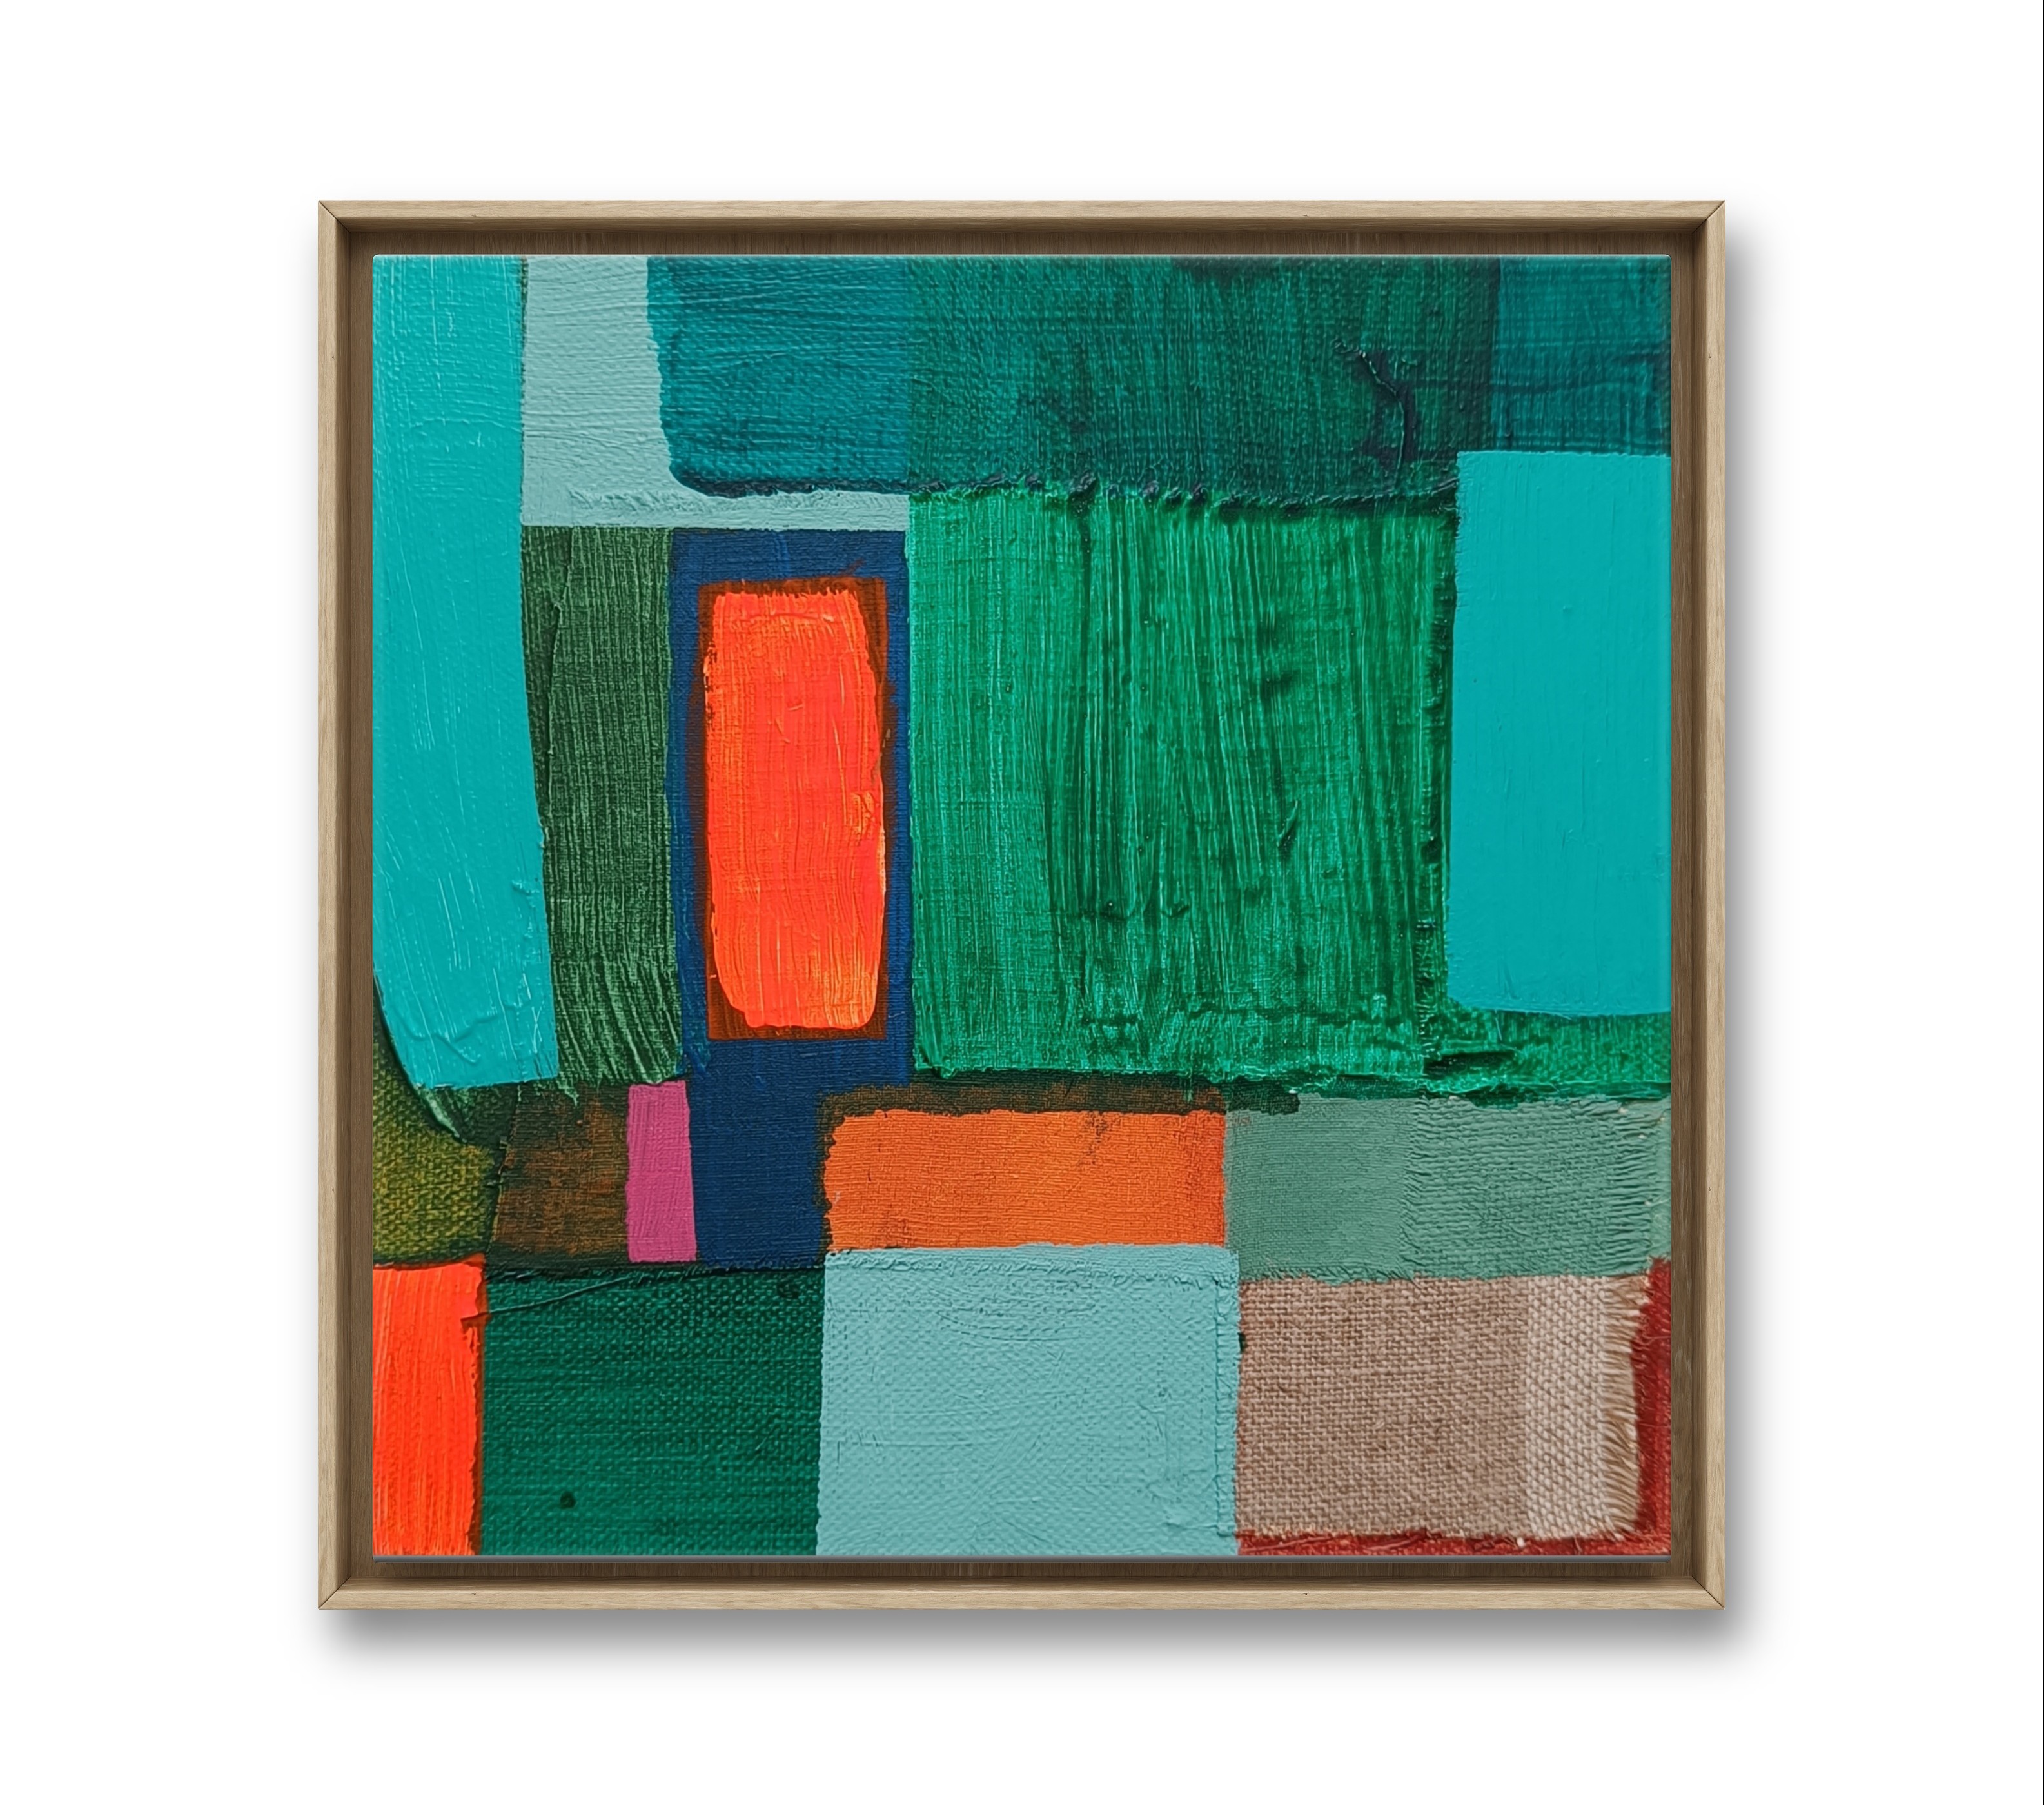 "Orange glow in green", 20x20cm, painting on canvas, example framing